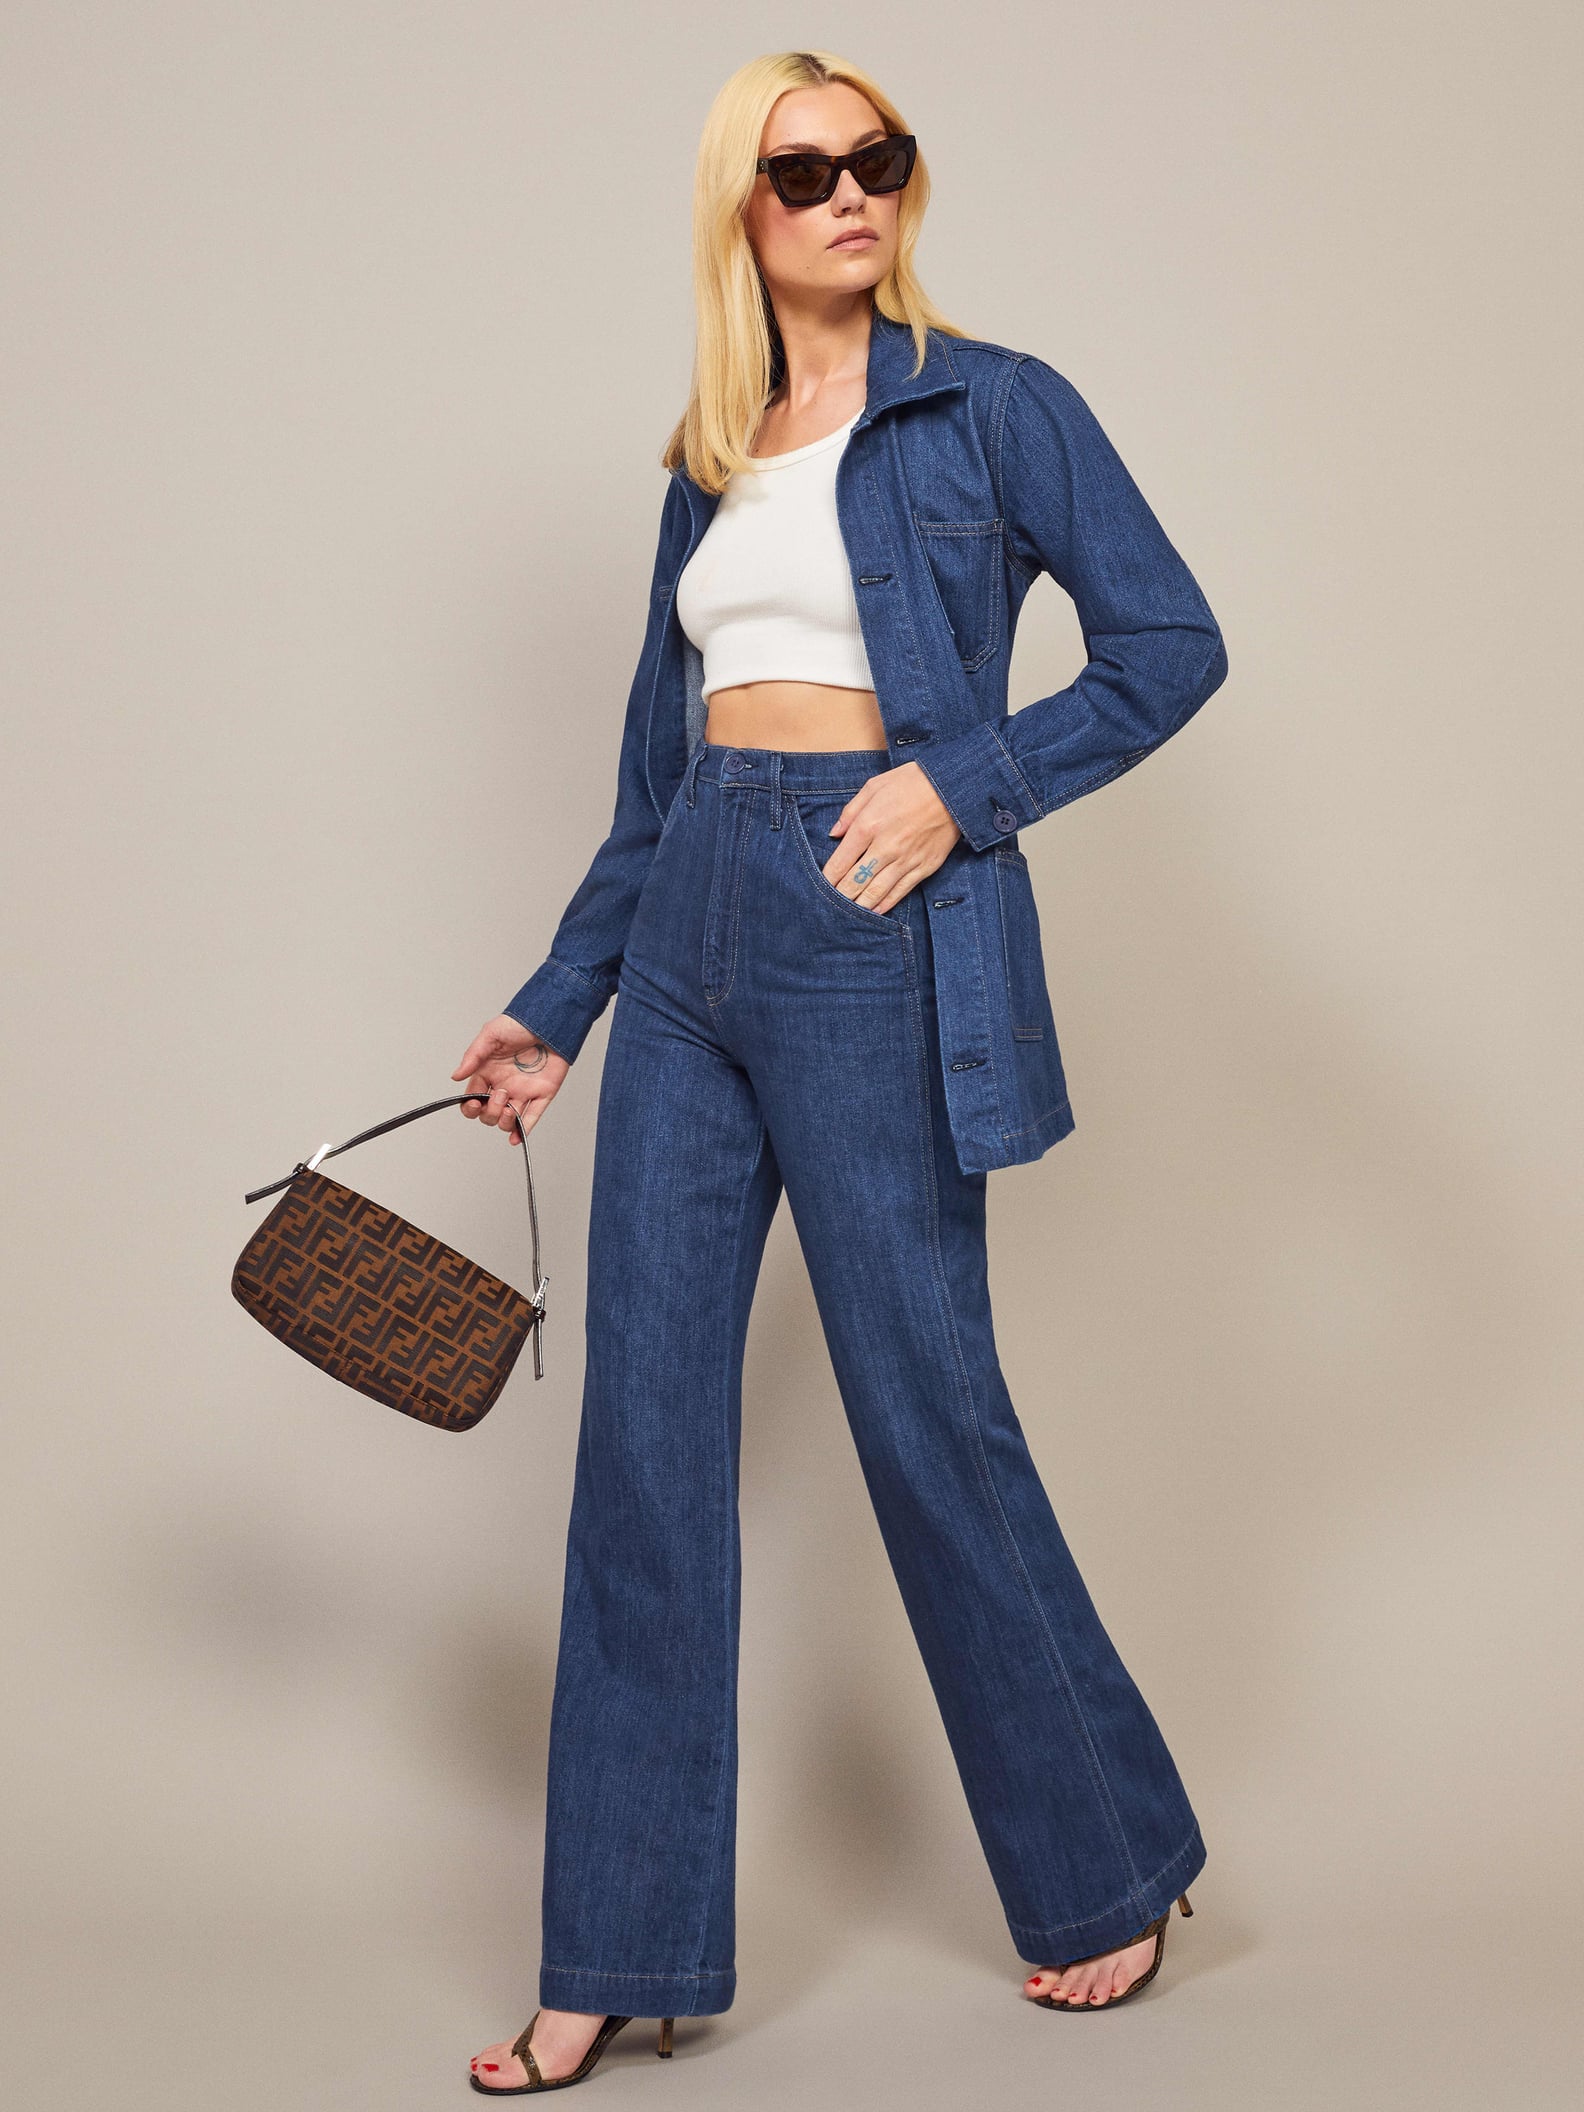 Reformation's New Power Dressing Jeans Collection 2020 | POPSUGAR Fashion